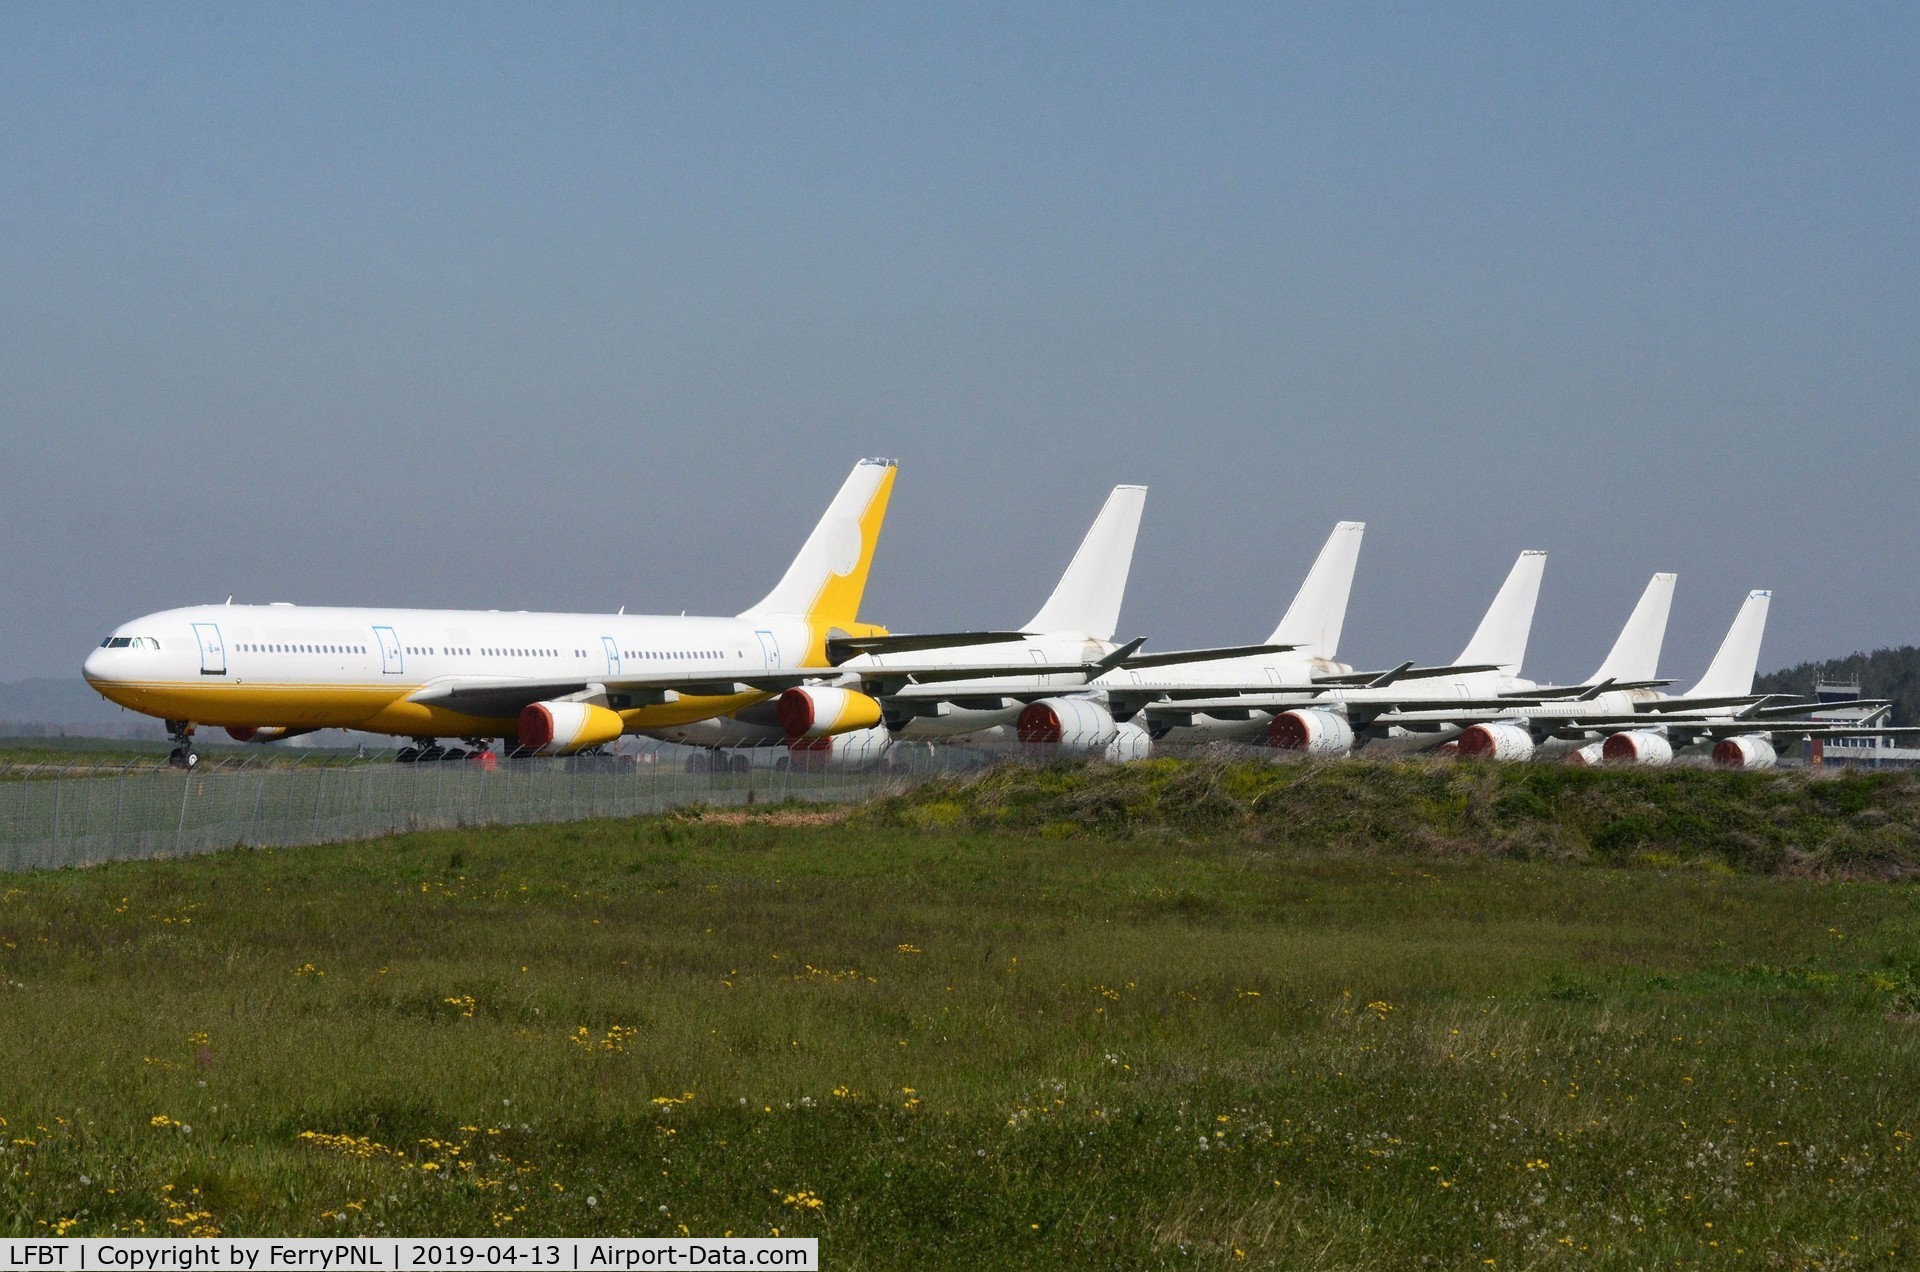 Tarbes Airport, Lourdes Pyrenees Airport France (LFBT) - Decomissioned A340's at Tarbes, France